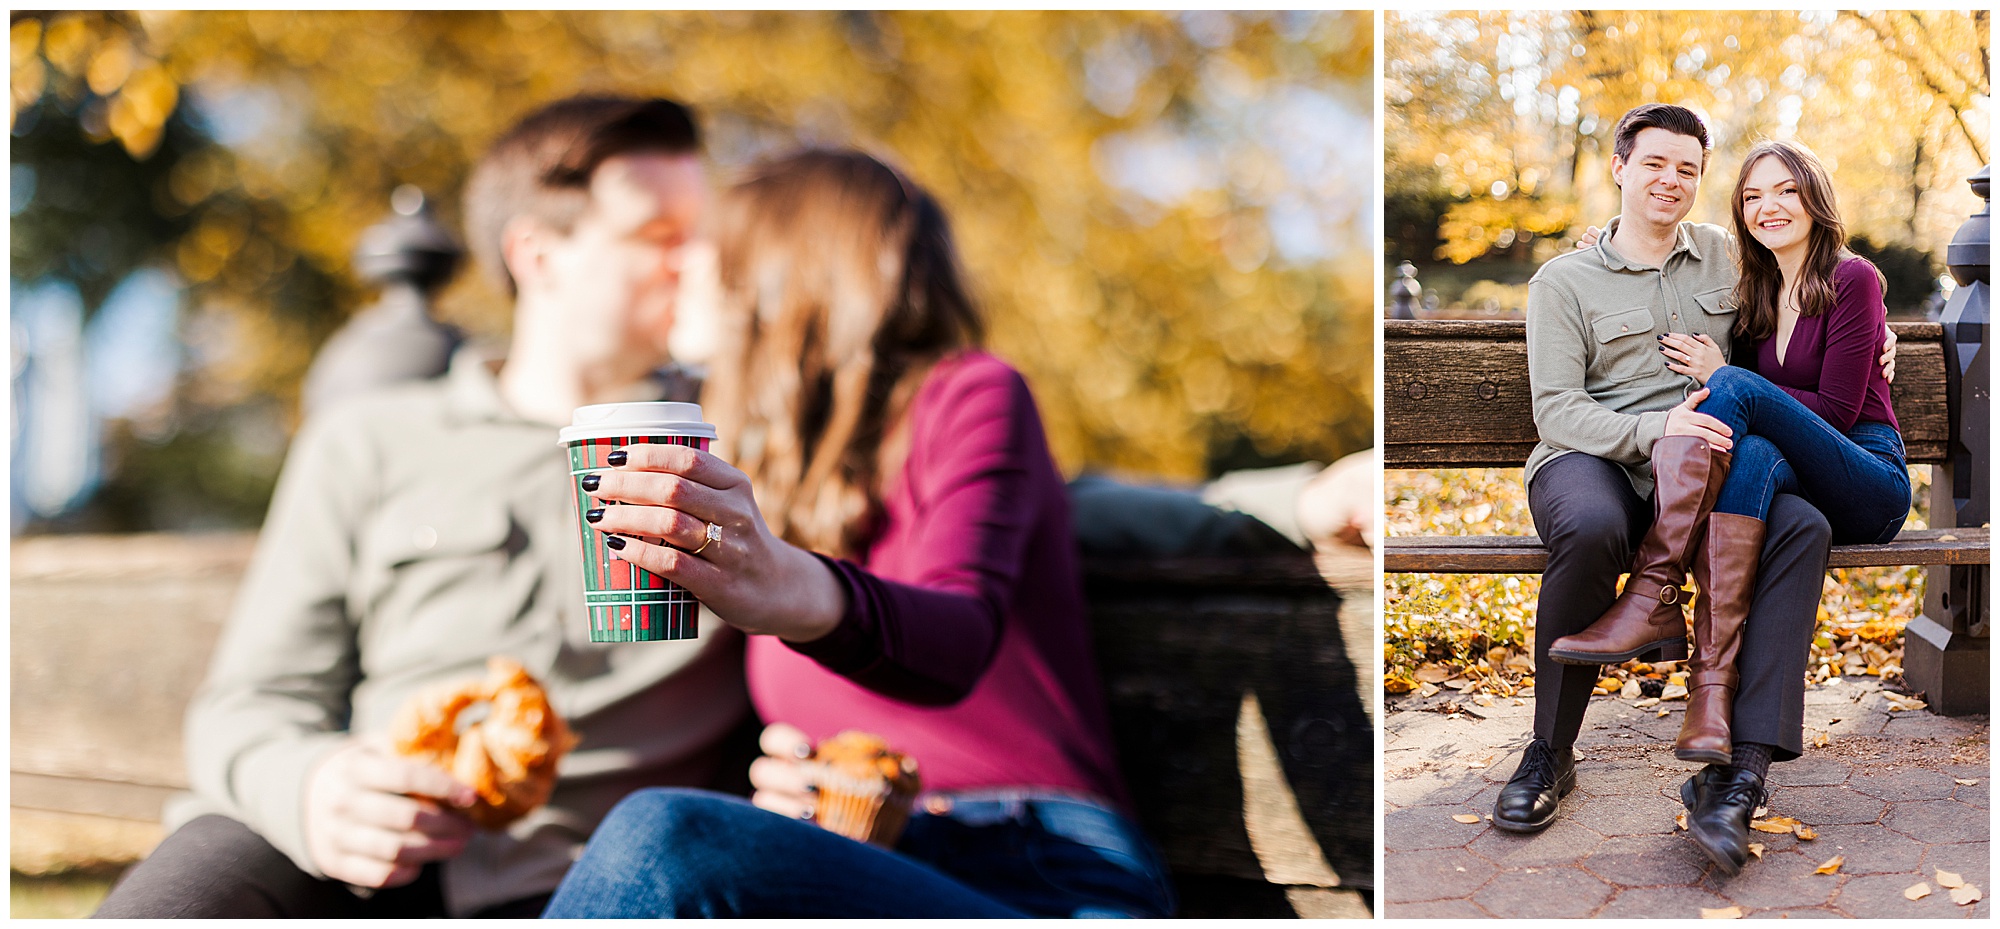 Special Engagement Photoshoot in Central Park